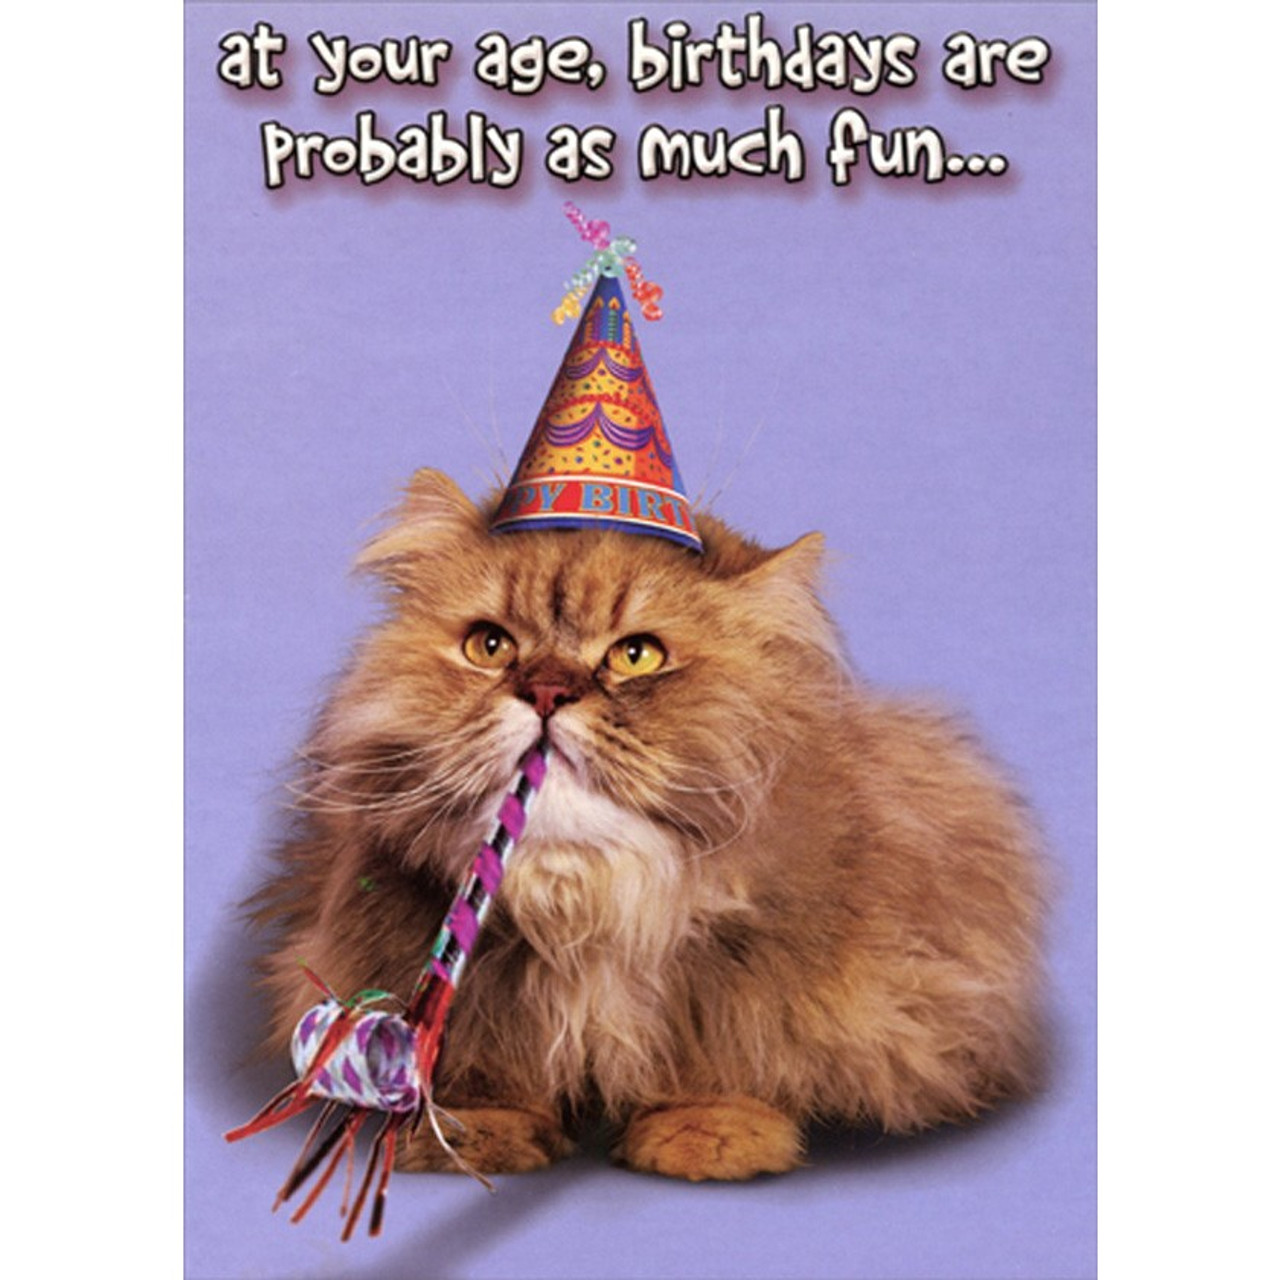 As Much Fun : Cat with Party Hat and Horn Funny : Humorous Risque ...